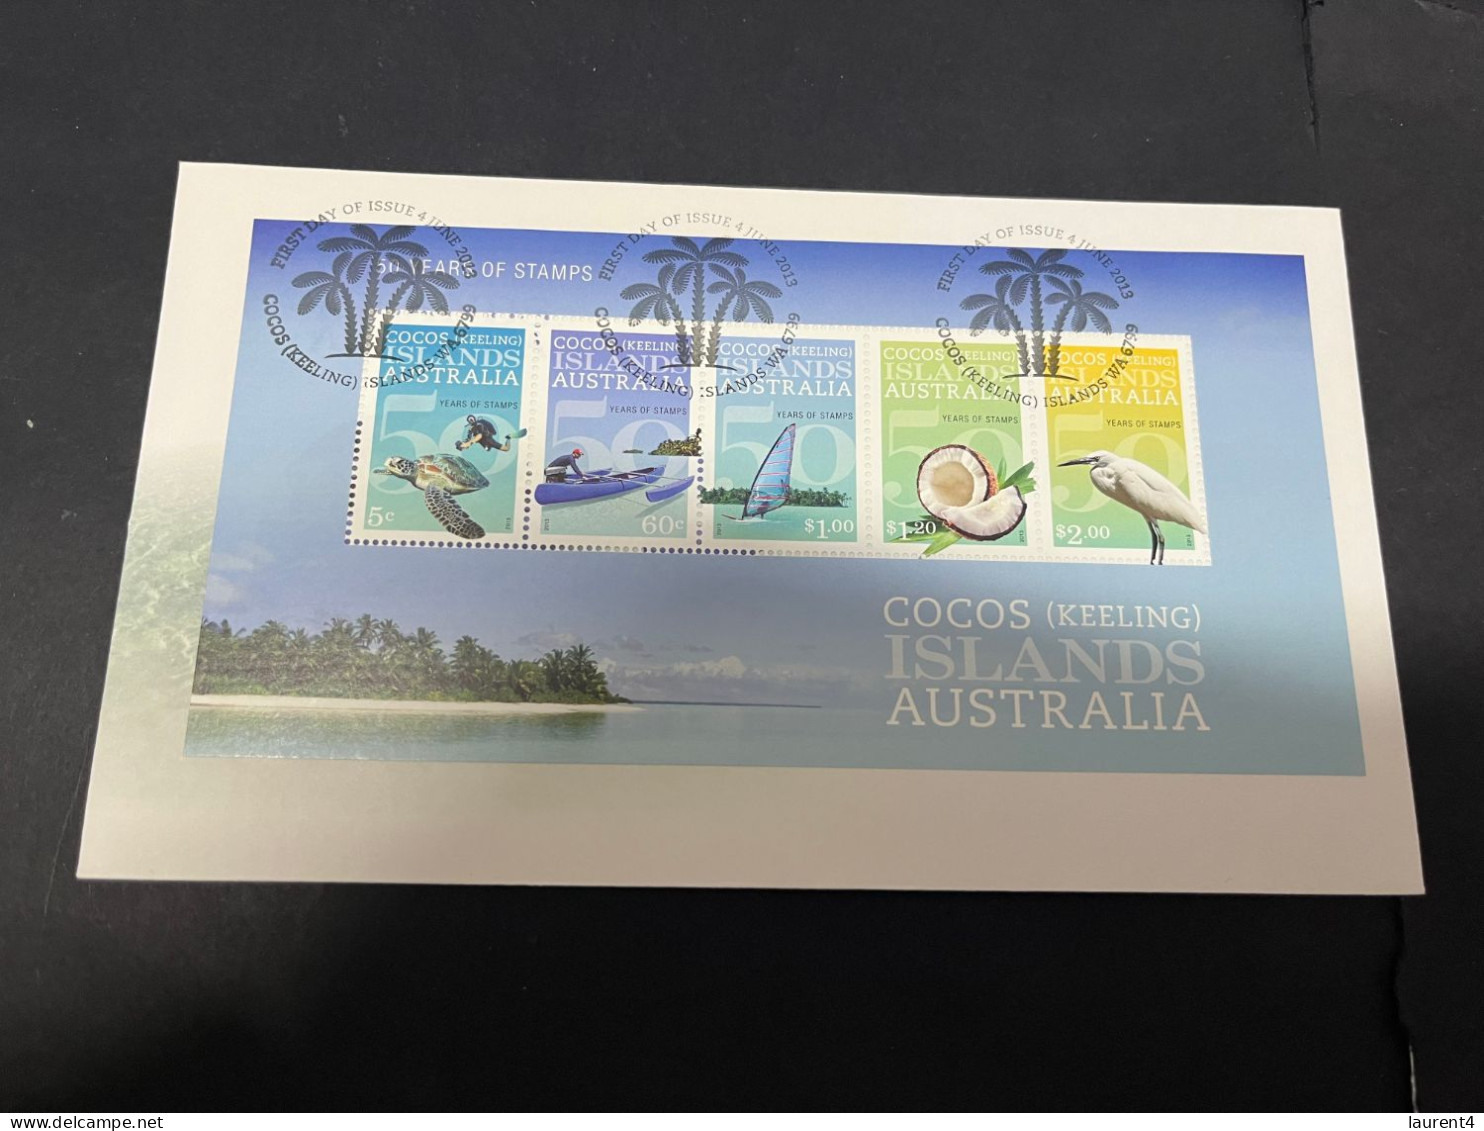 13-2-2024 (4 X 9) Australia - Cocos (Keeling) Islands FDC Cover (with Mini-sheet) 2019 - 50 Years Of Stamps - Islas Cocos (Keeling)